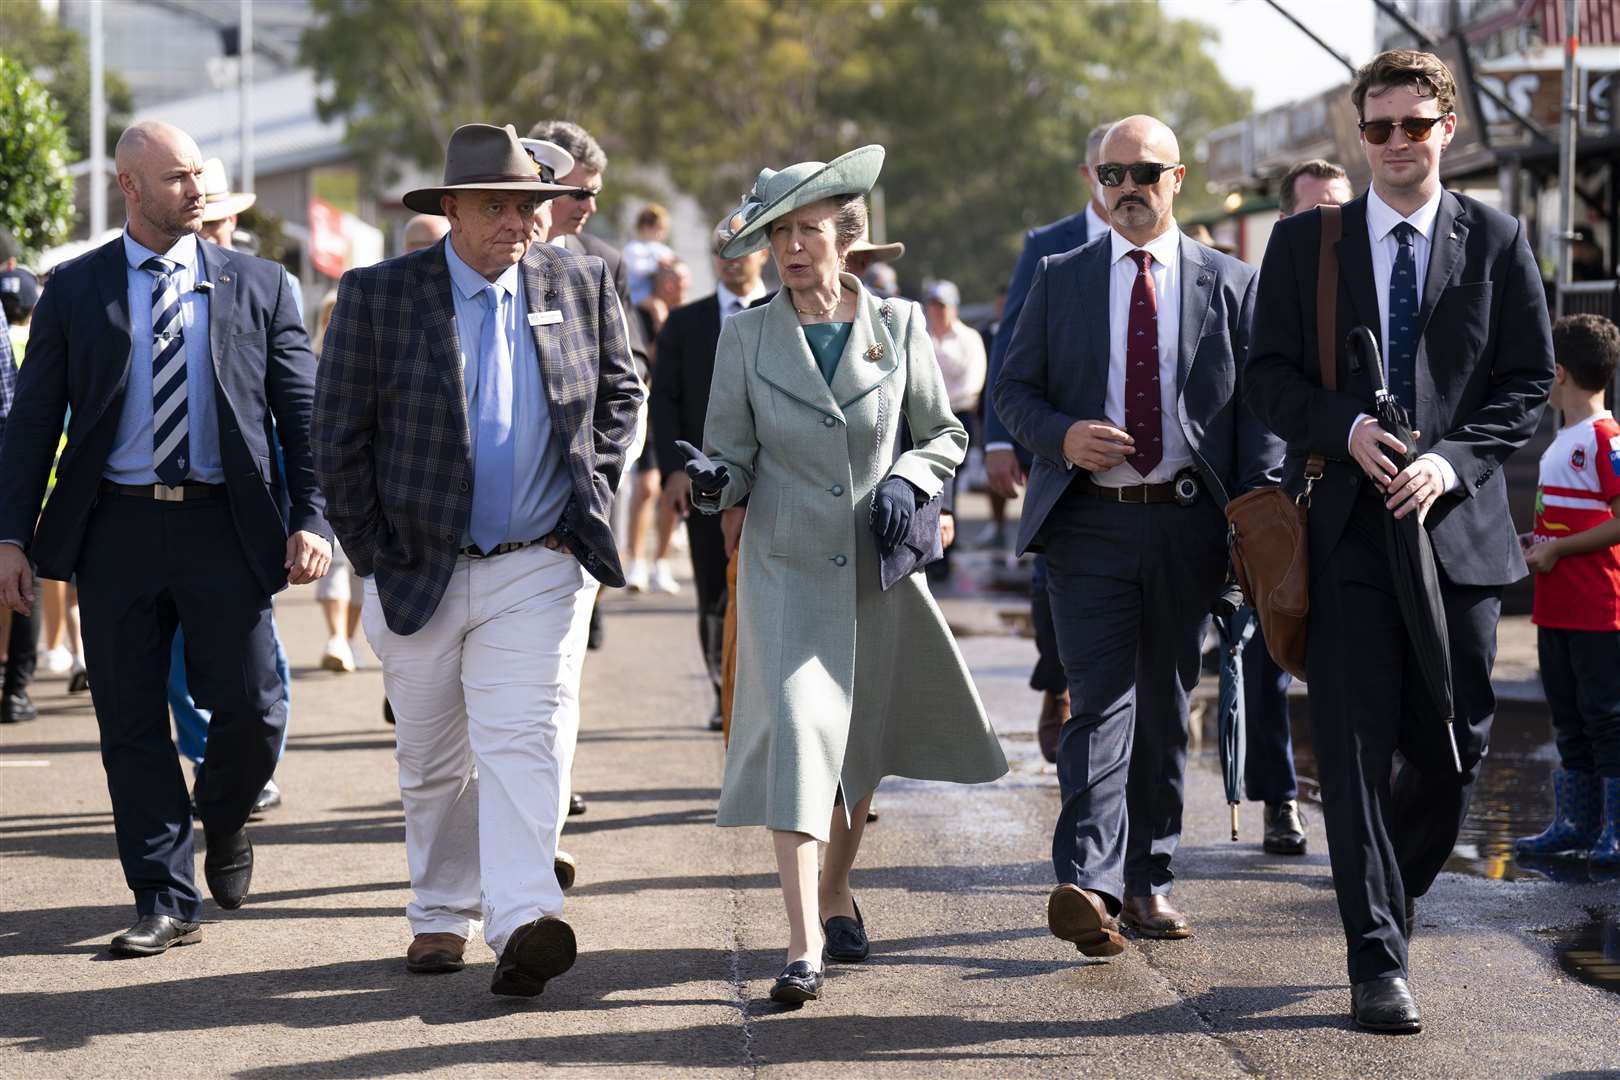 Anne changed into a green ensemble to tour the Sydney Royal Easter Show (Kirsty O’Connor/PA)